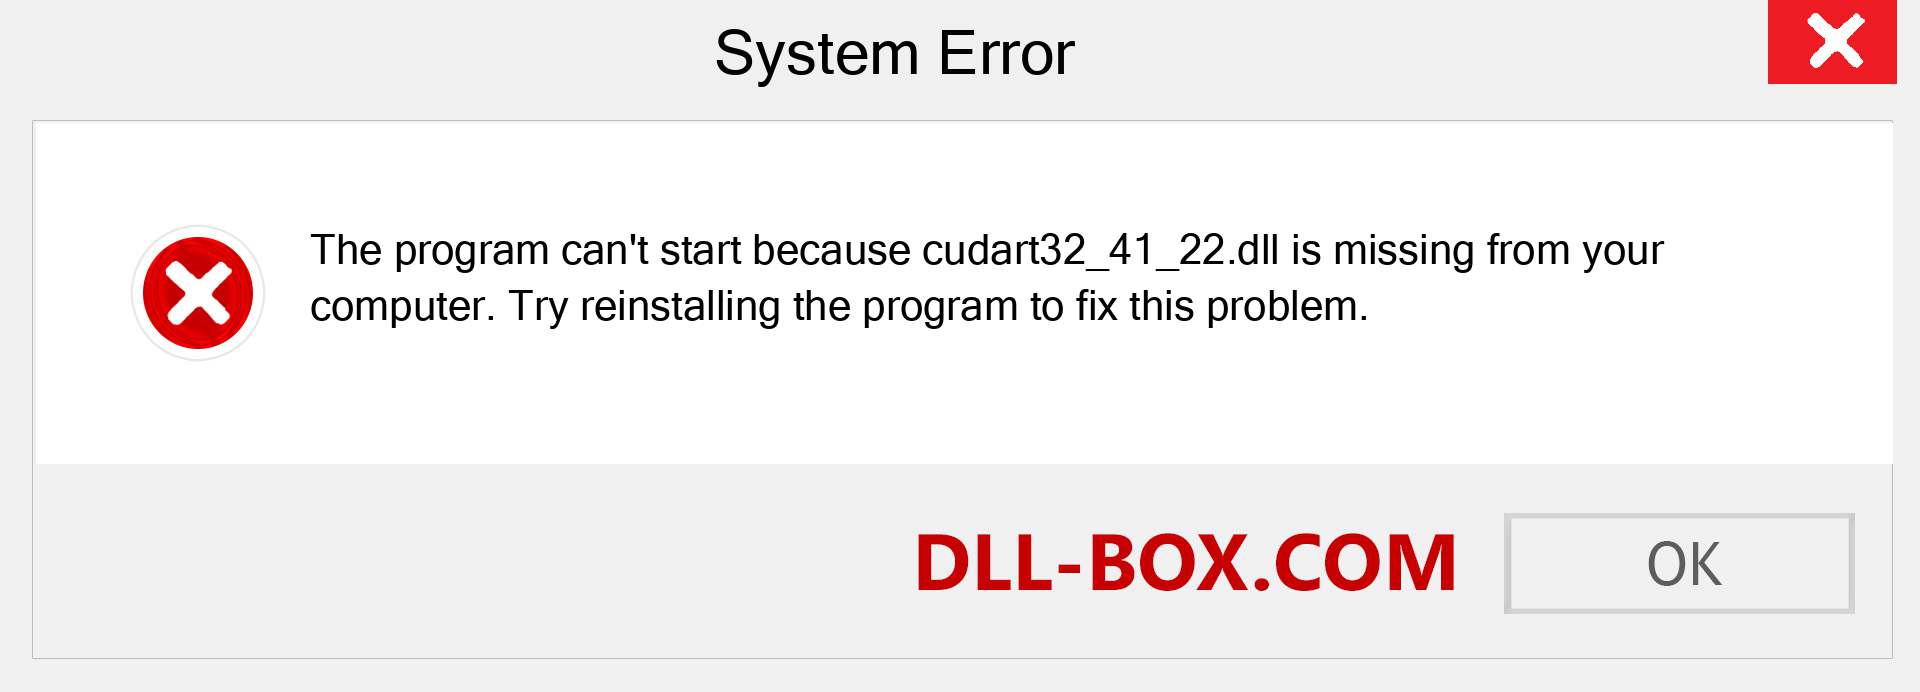  cudart32_41_22.dll file is missing?. Download for Windows 7, 8, 10 - Fix  cudart32_41_22 dll Missing Error on Windows, photos, images